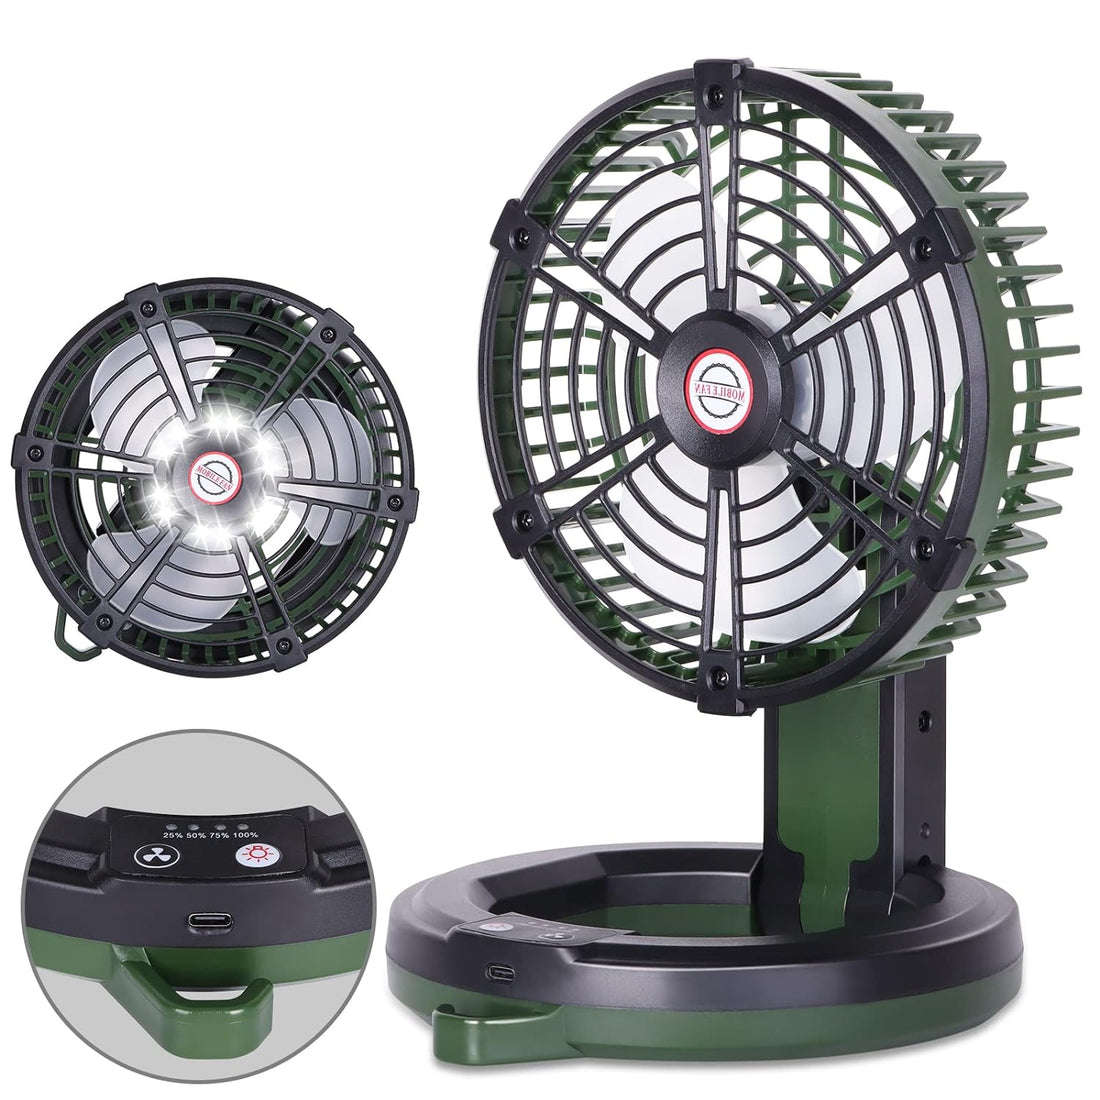 TDLOL Camping Fans Portable Rechargeable Fan with LED Lantern,5200mAh Portable Camping Fan Rechargeable,Up to 25 hours,Personal Desk Tent Fan for Office,Home, Green X90…